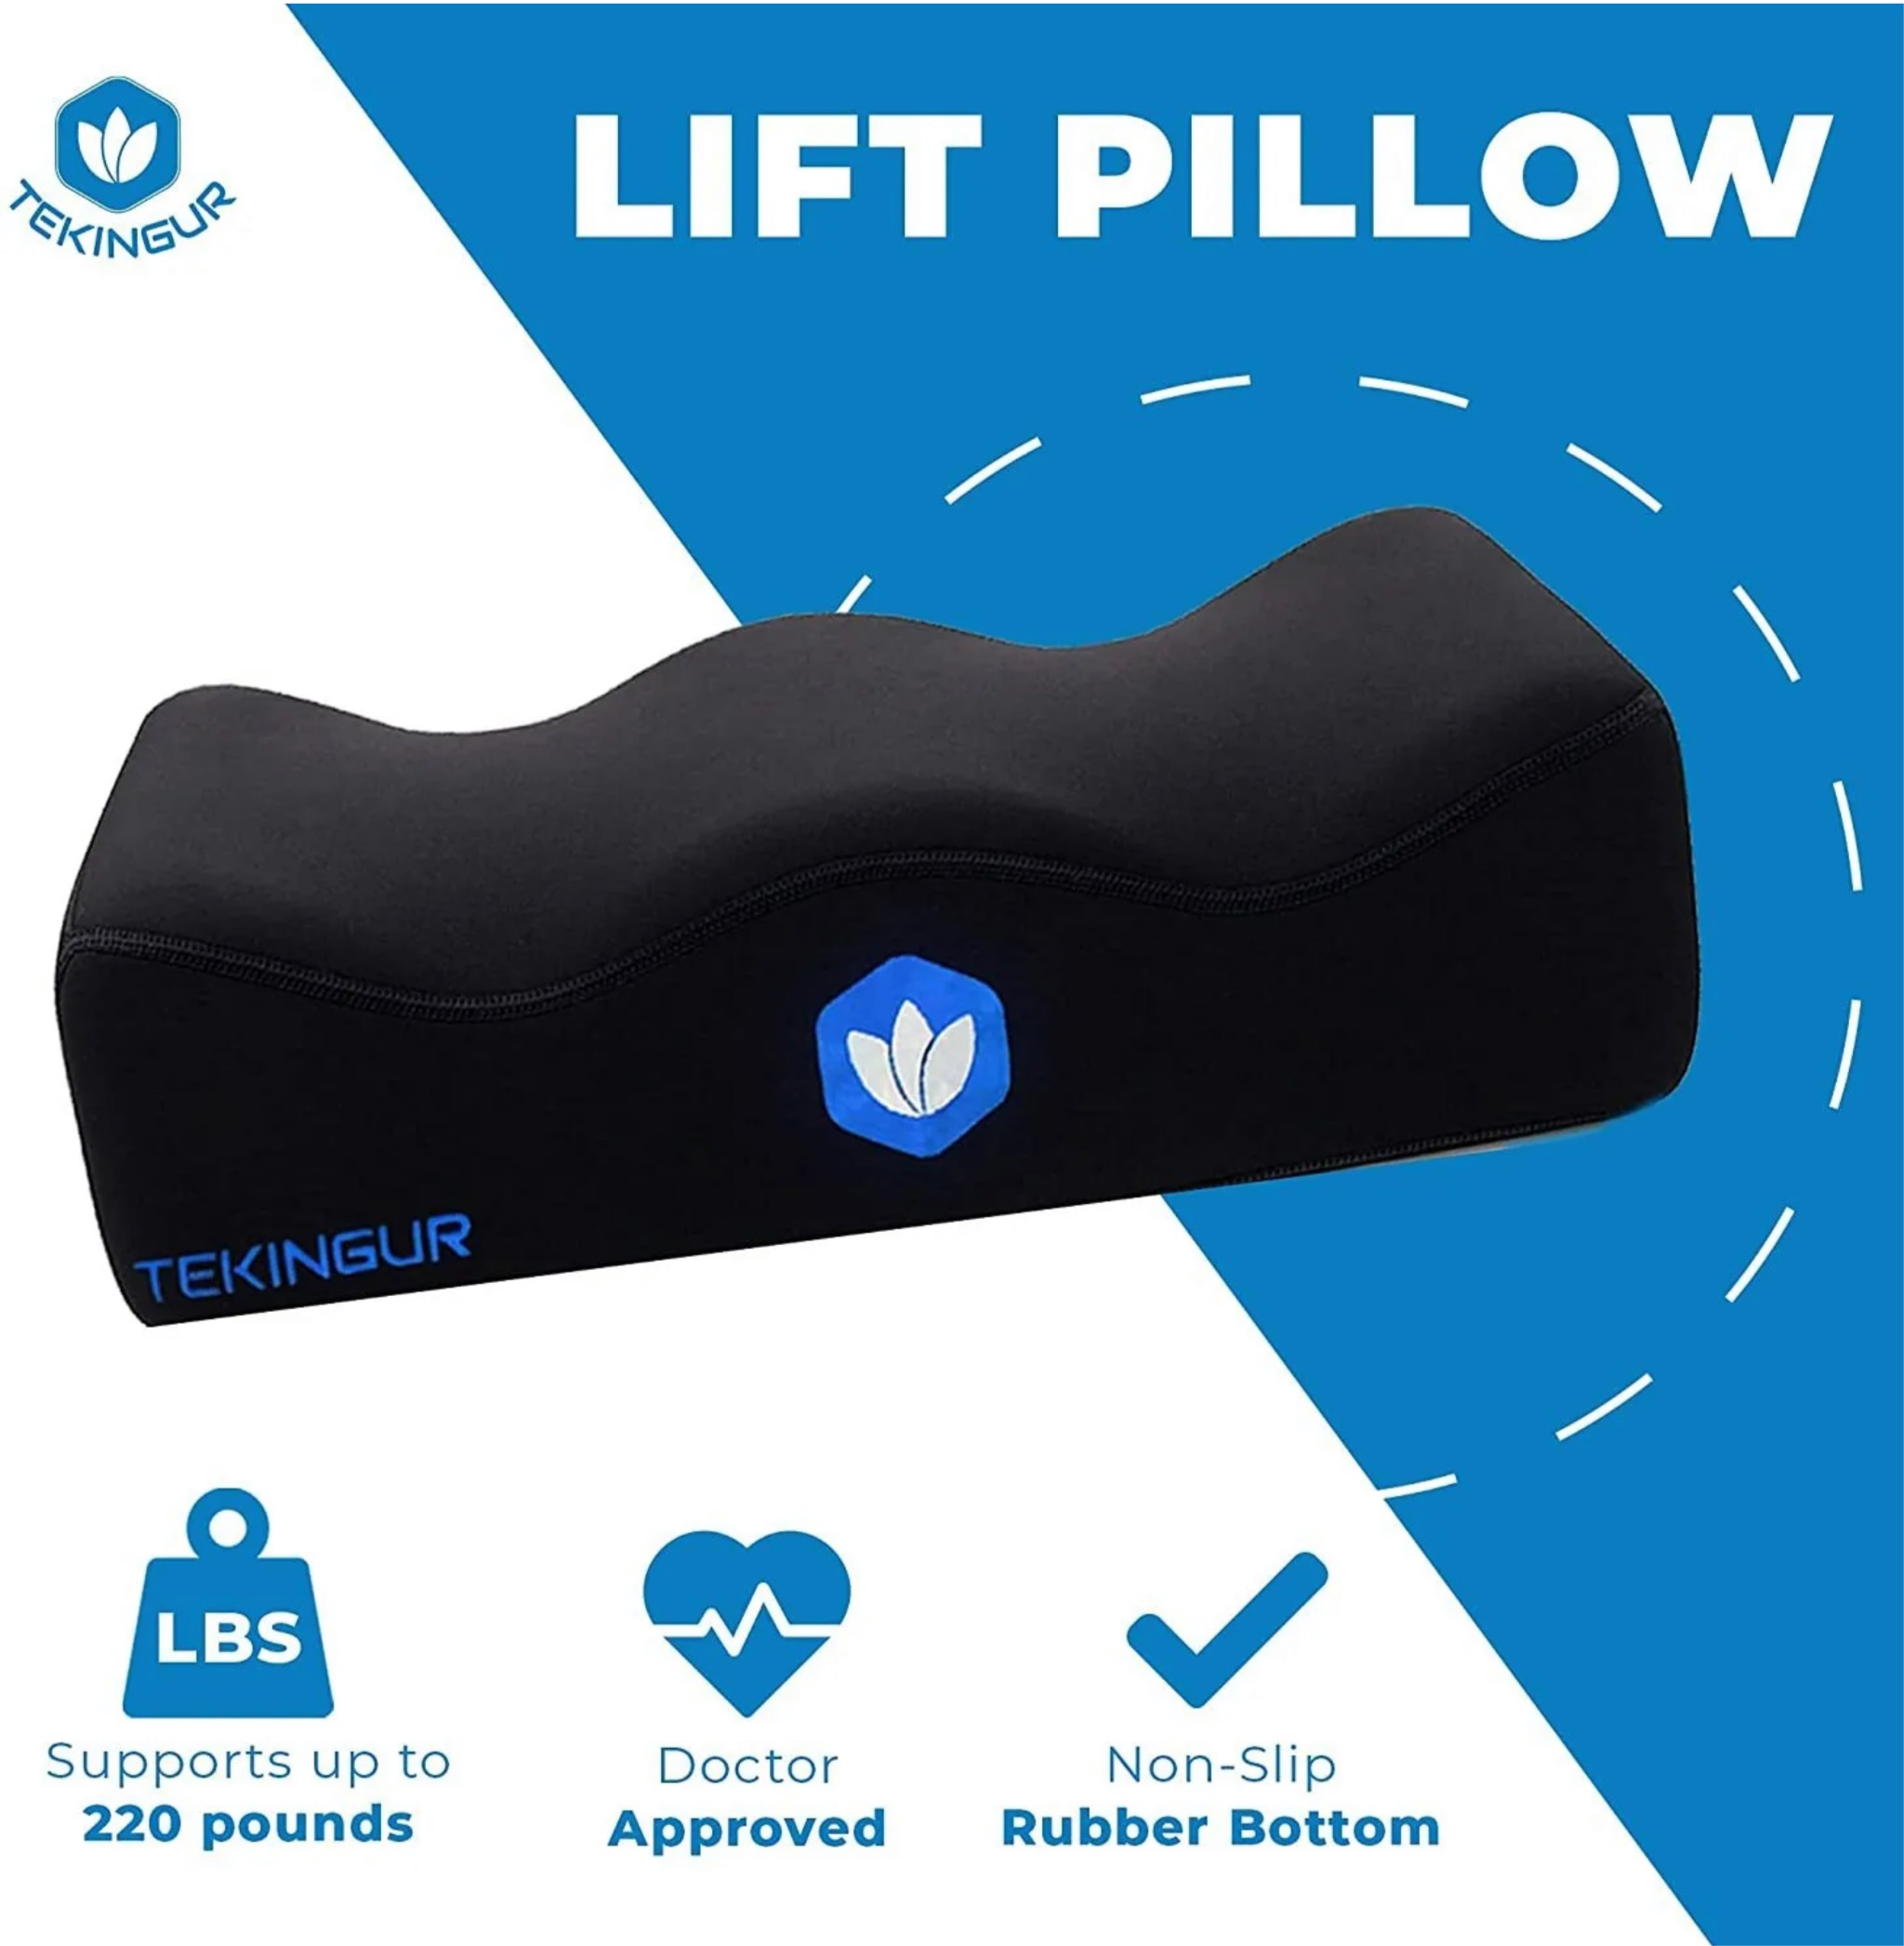 Worried About How You Sit After Having Brazilian Butt Lift Surgery? by Bombshell Booty Pillow